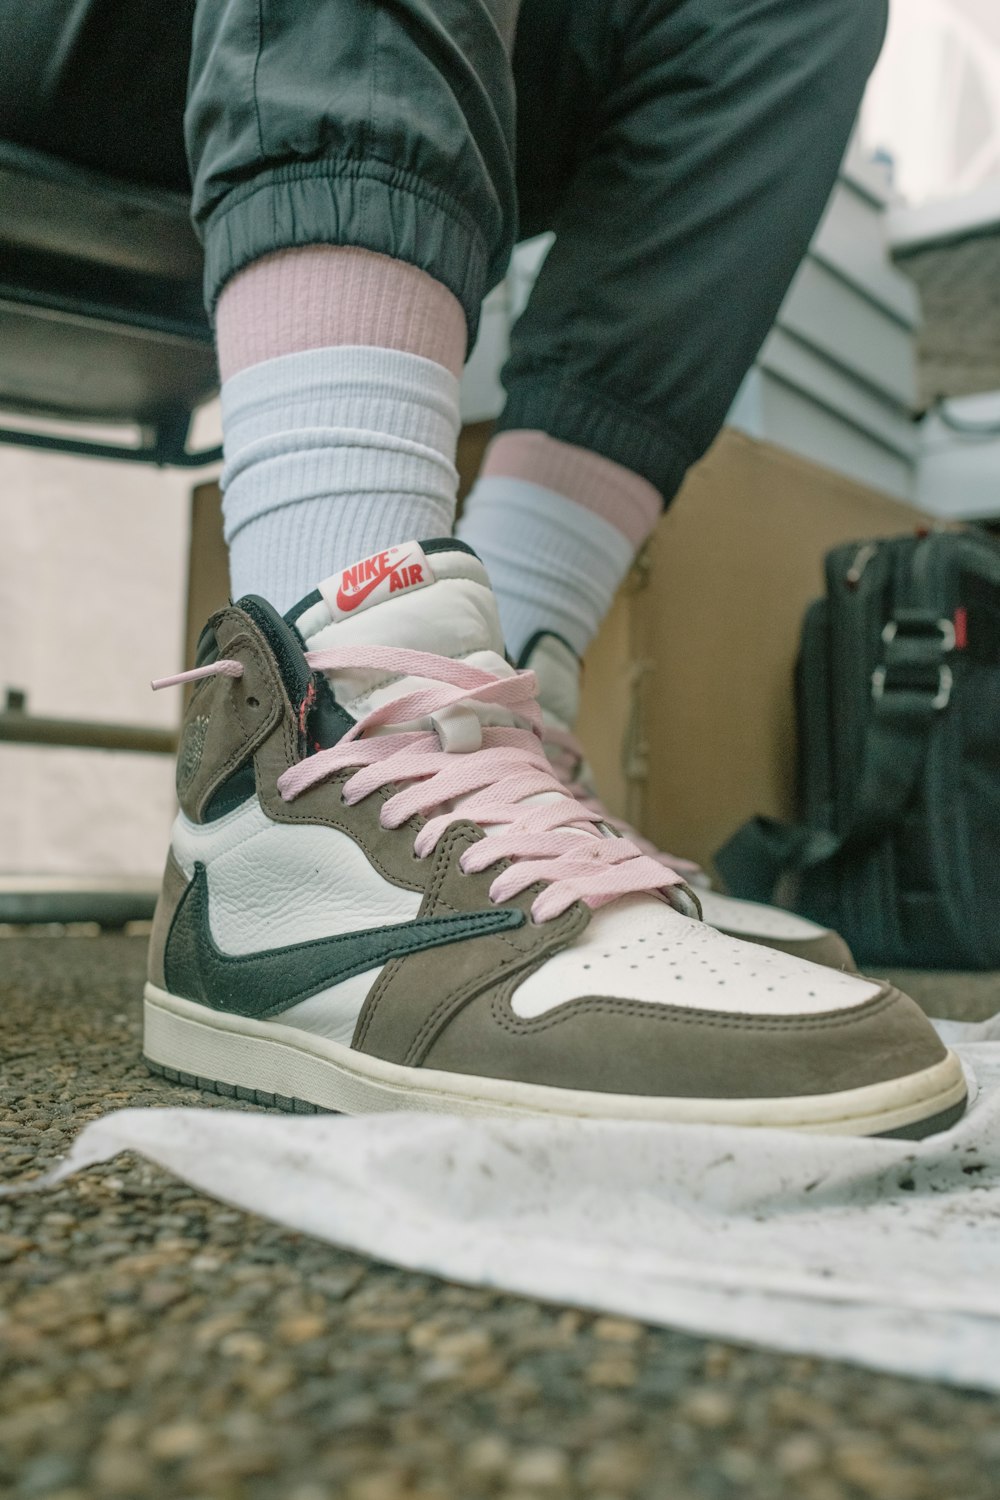 person sitting and holding white, orange, and black Air Jordan 1 low-top  sneaker photo – Free London Image on Unsplash